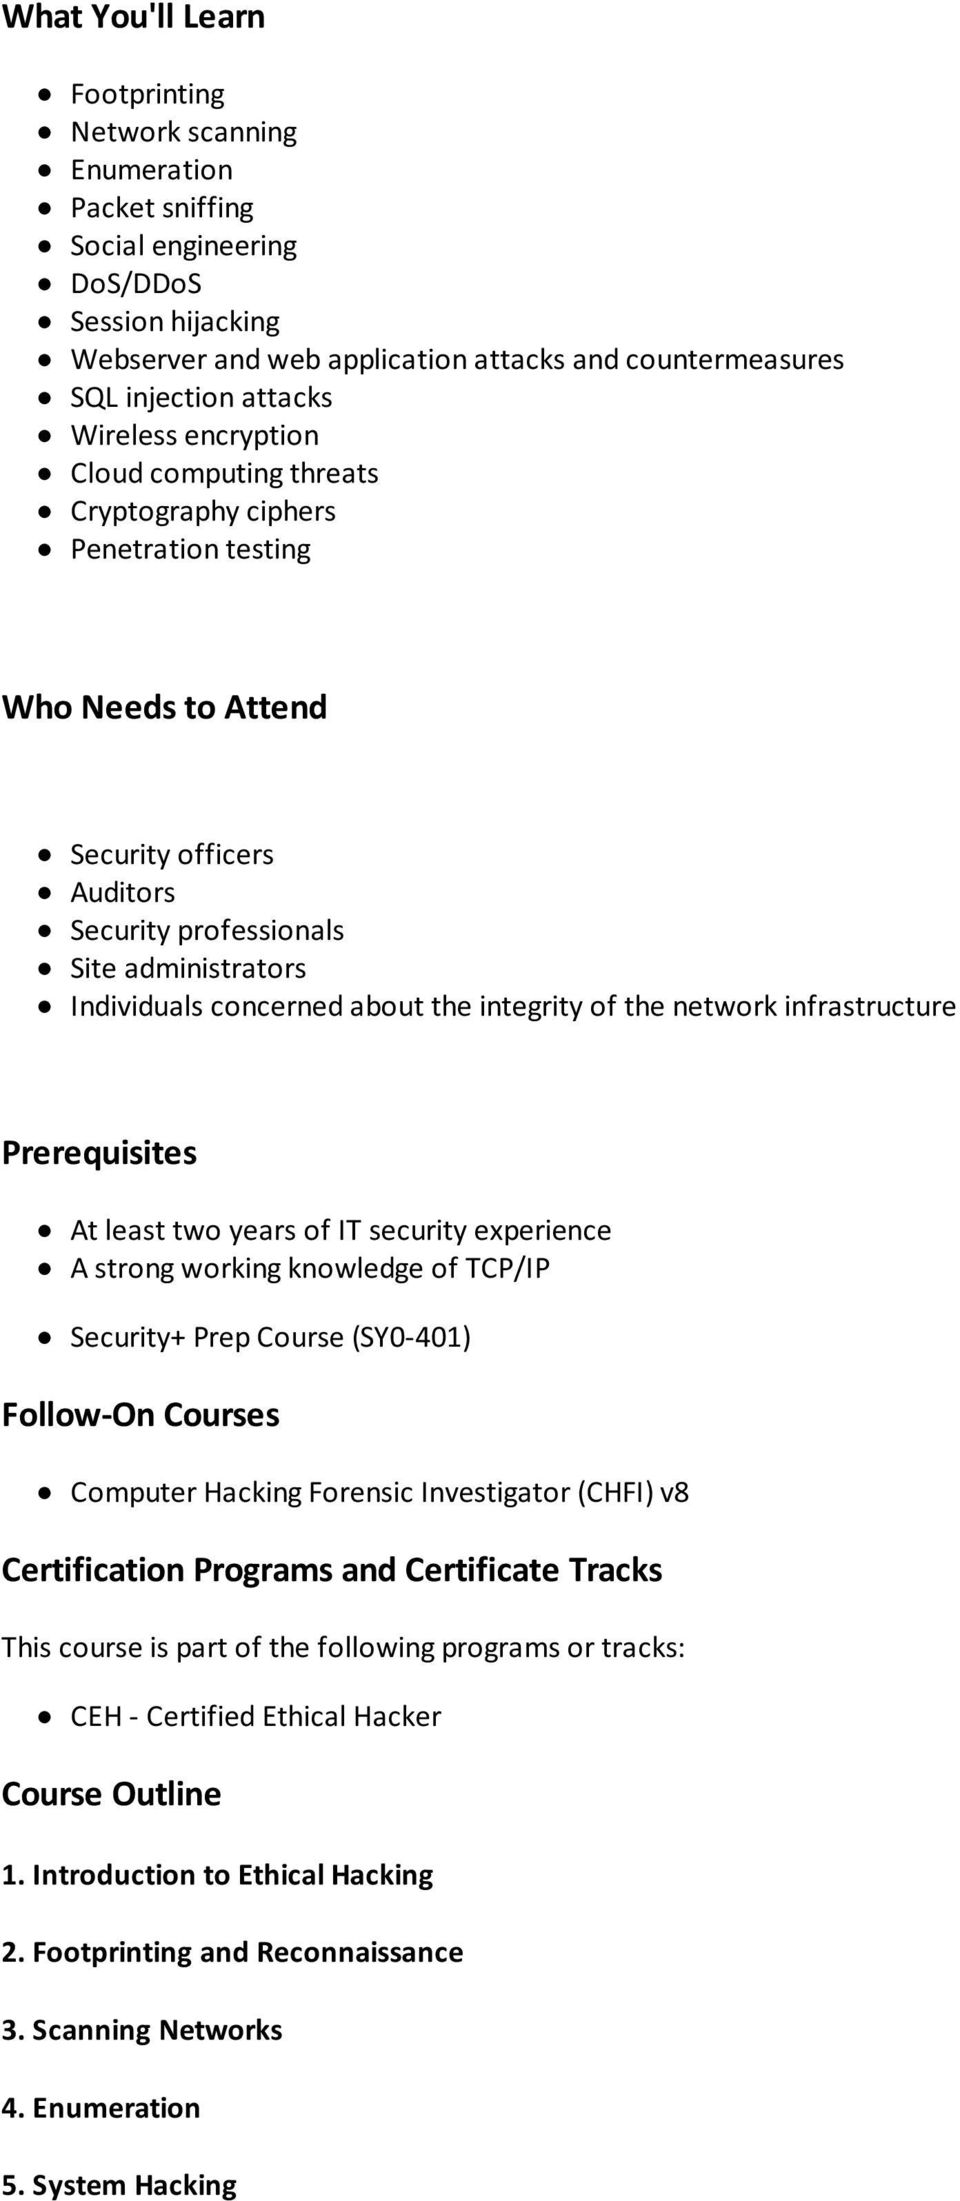 concerned about the integrity of the network infrastructure Prerequisites At least two years of IT security experience A strong working knowledge of TCP/IP Security+ Prep Course (SY0-401) Follow-On